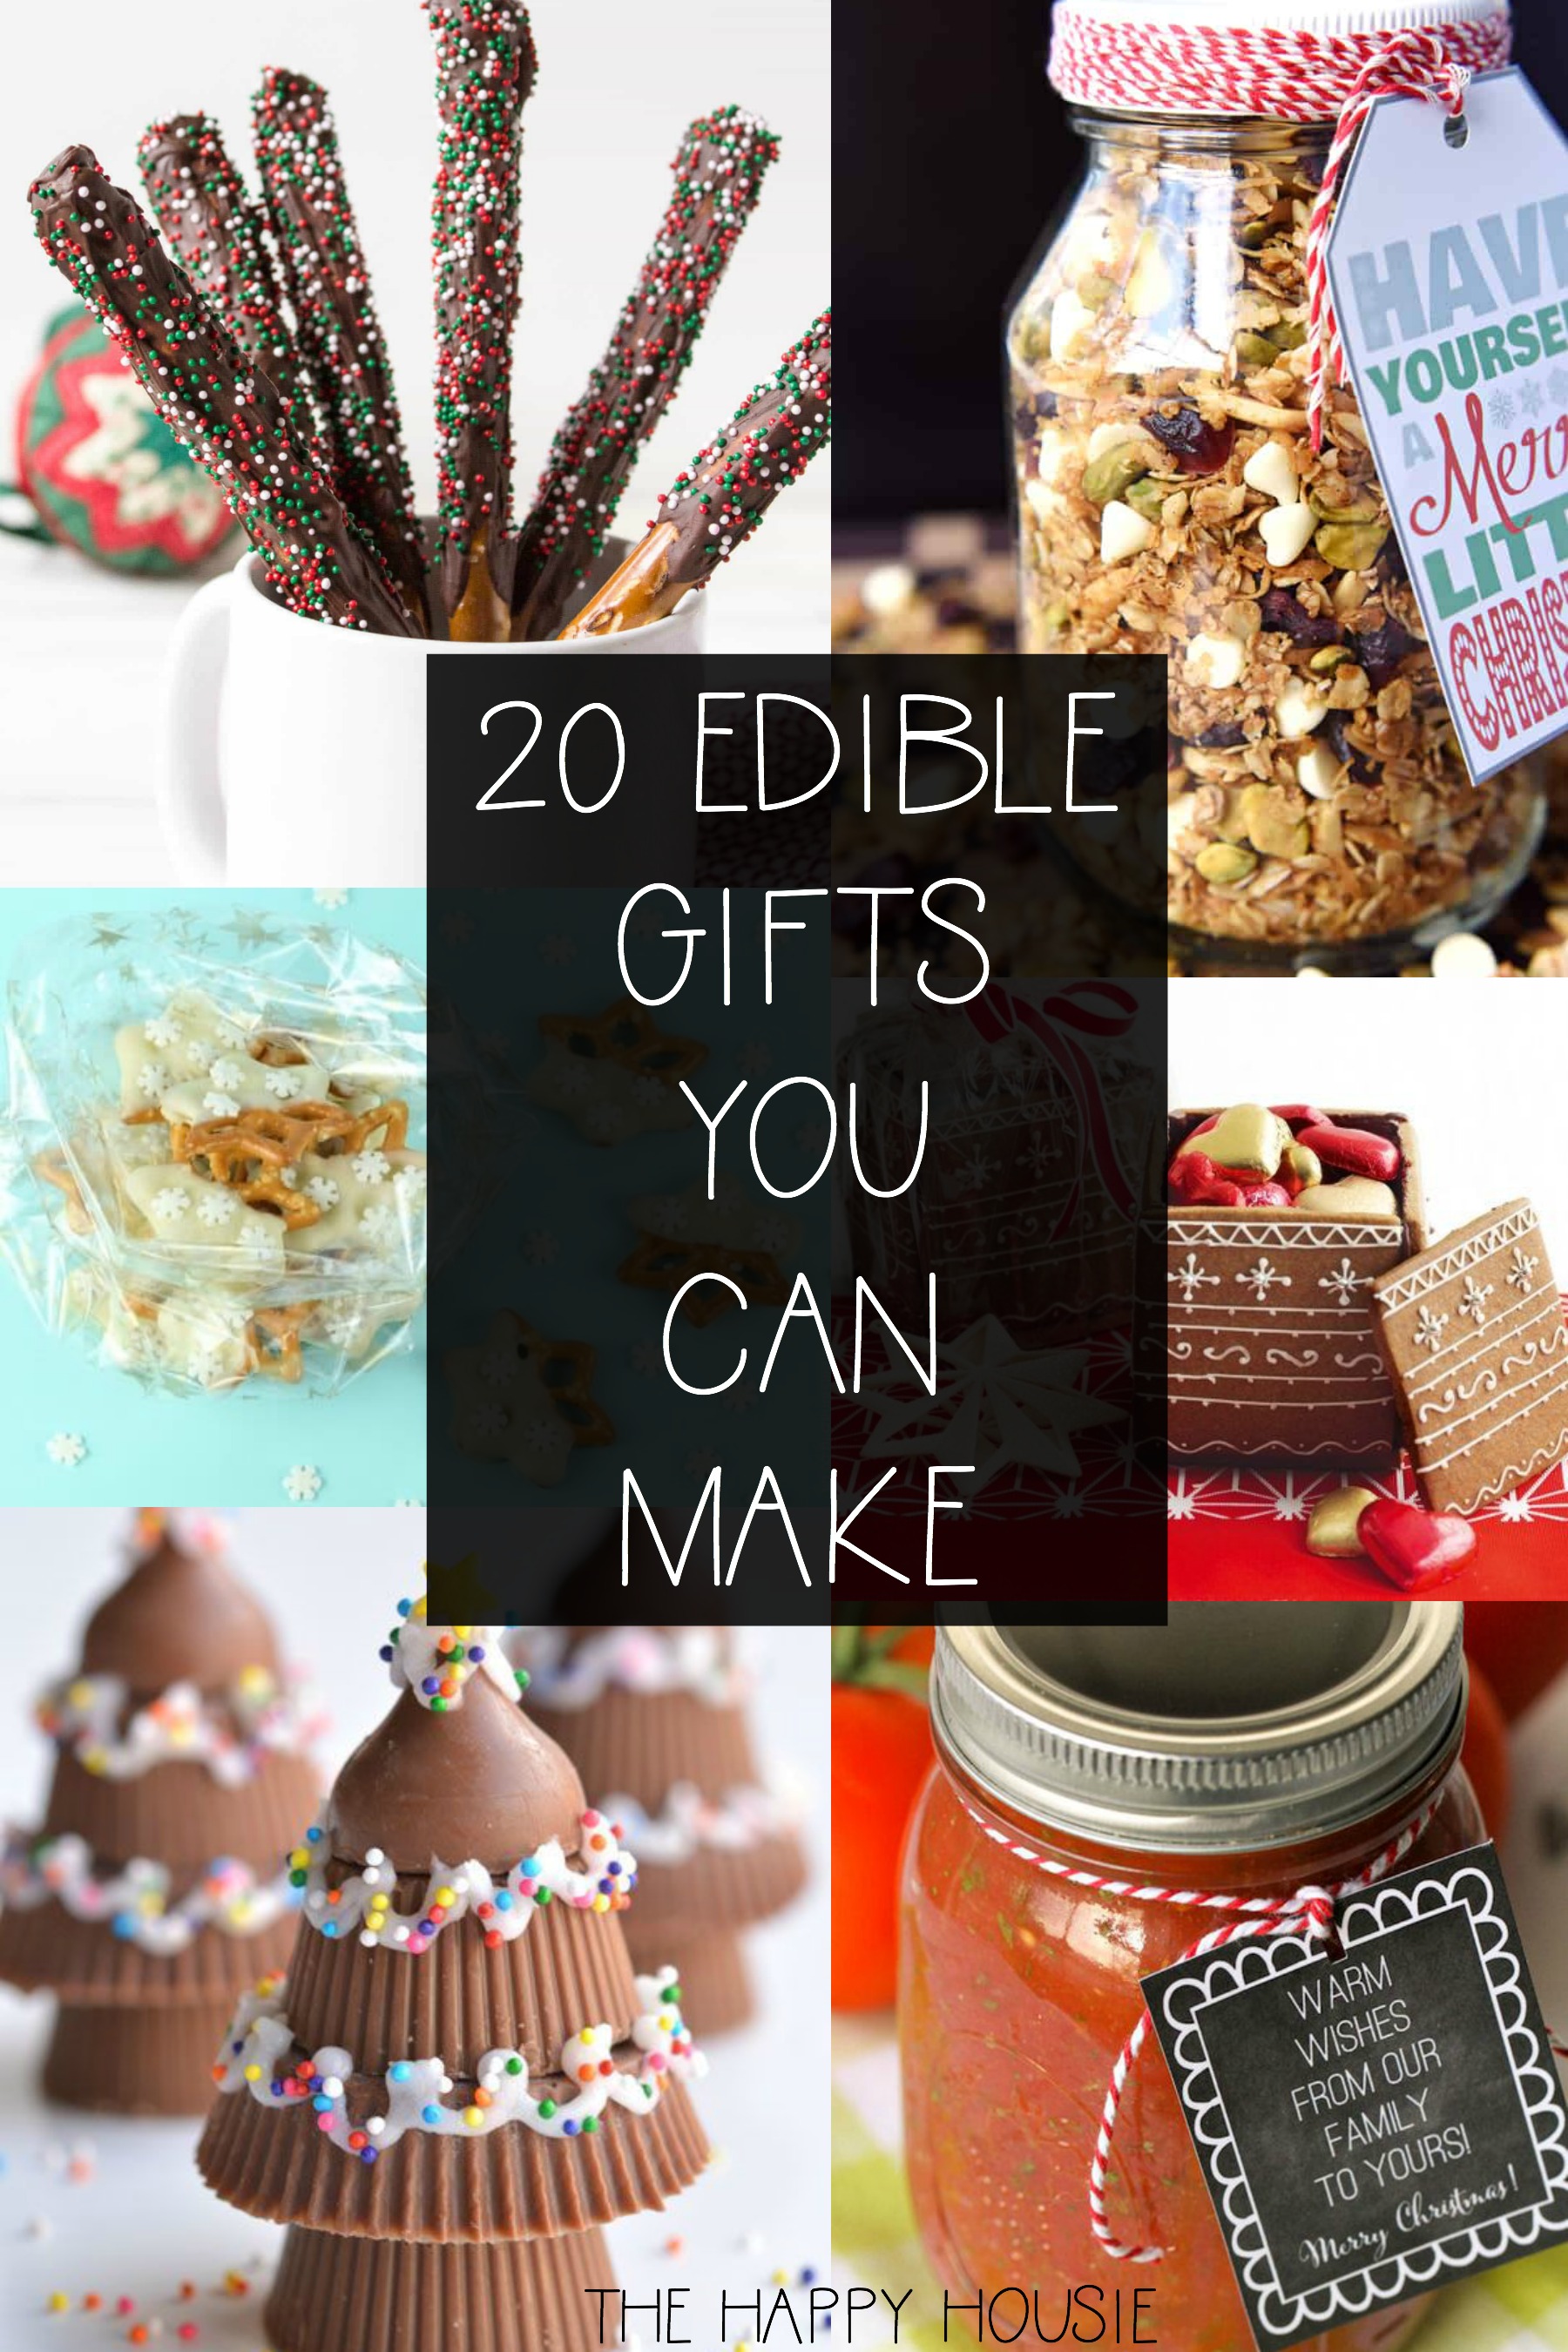 20 edible gifts you can make graphic.